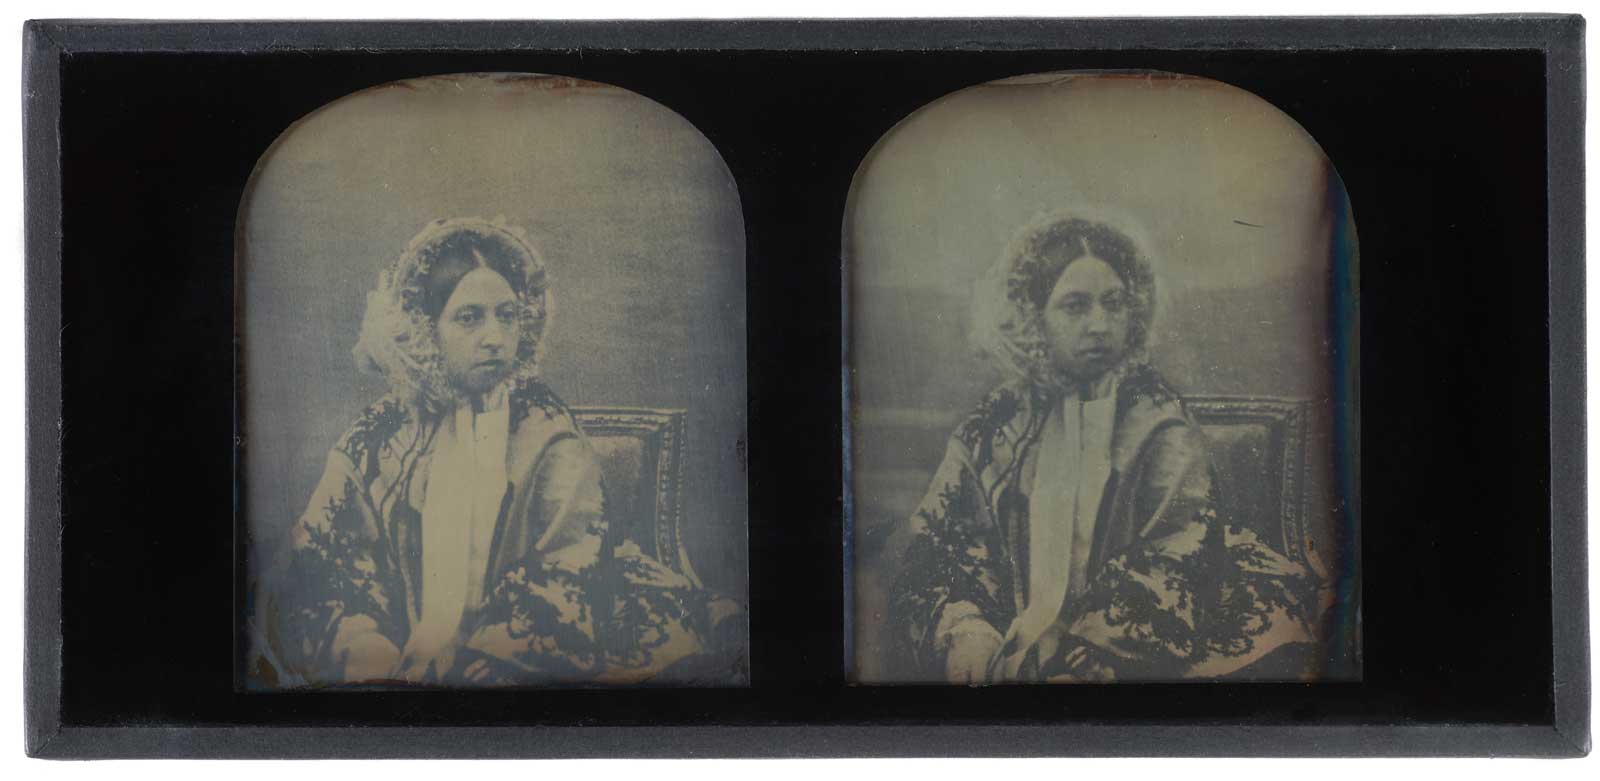 Hand-tinted stereoscopic daguerreotype of Queen Victoria, c. 1850, by Antoine Claudet.  Bookshaped, expanding case of dark blue leather. Decorated with gilt. Brass clasp. Opens to reveal two daguerreotypes and pair of binoculars. Case lined with purple velvet. Leather spine broken. One picture speckled with black.